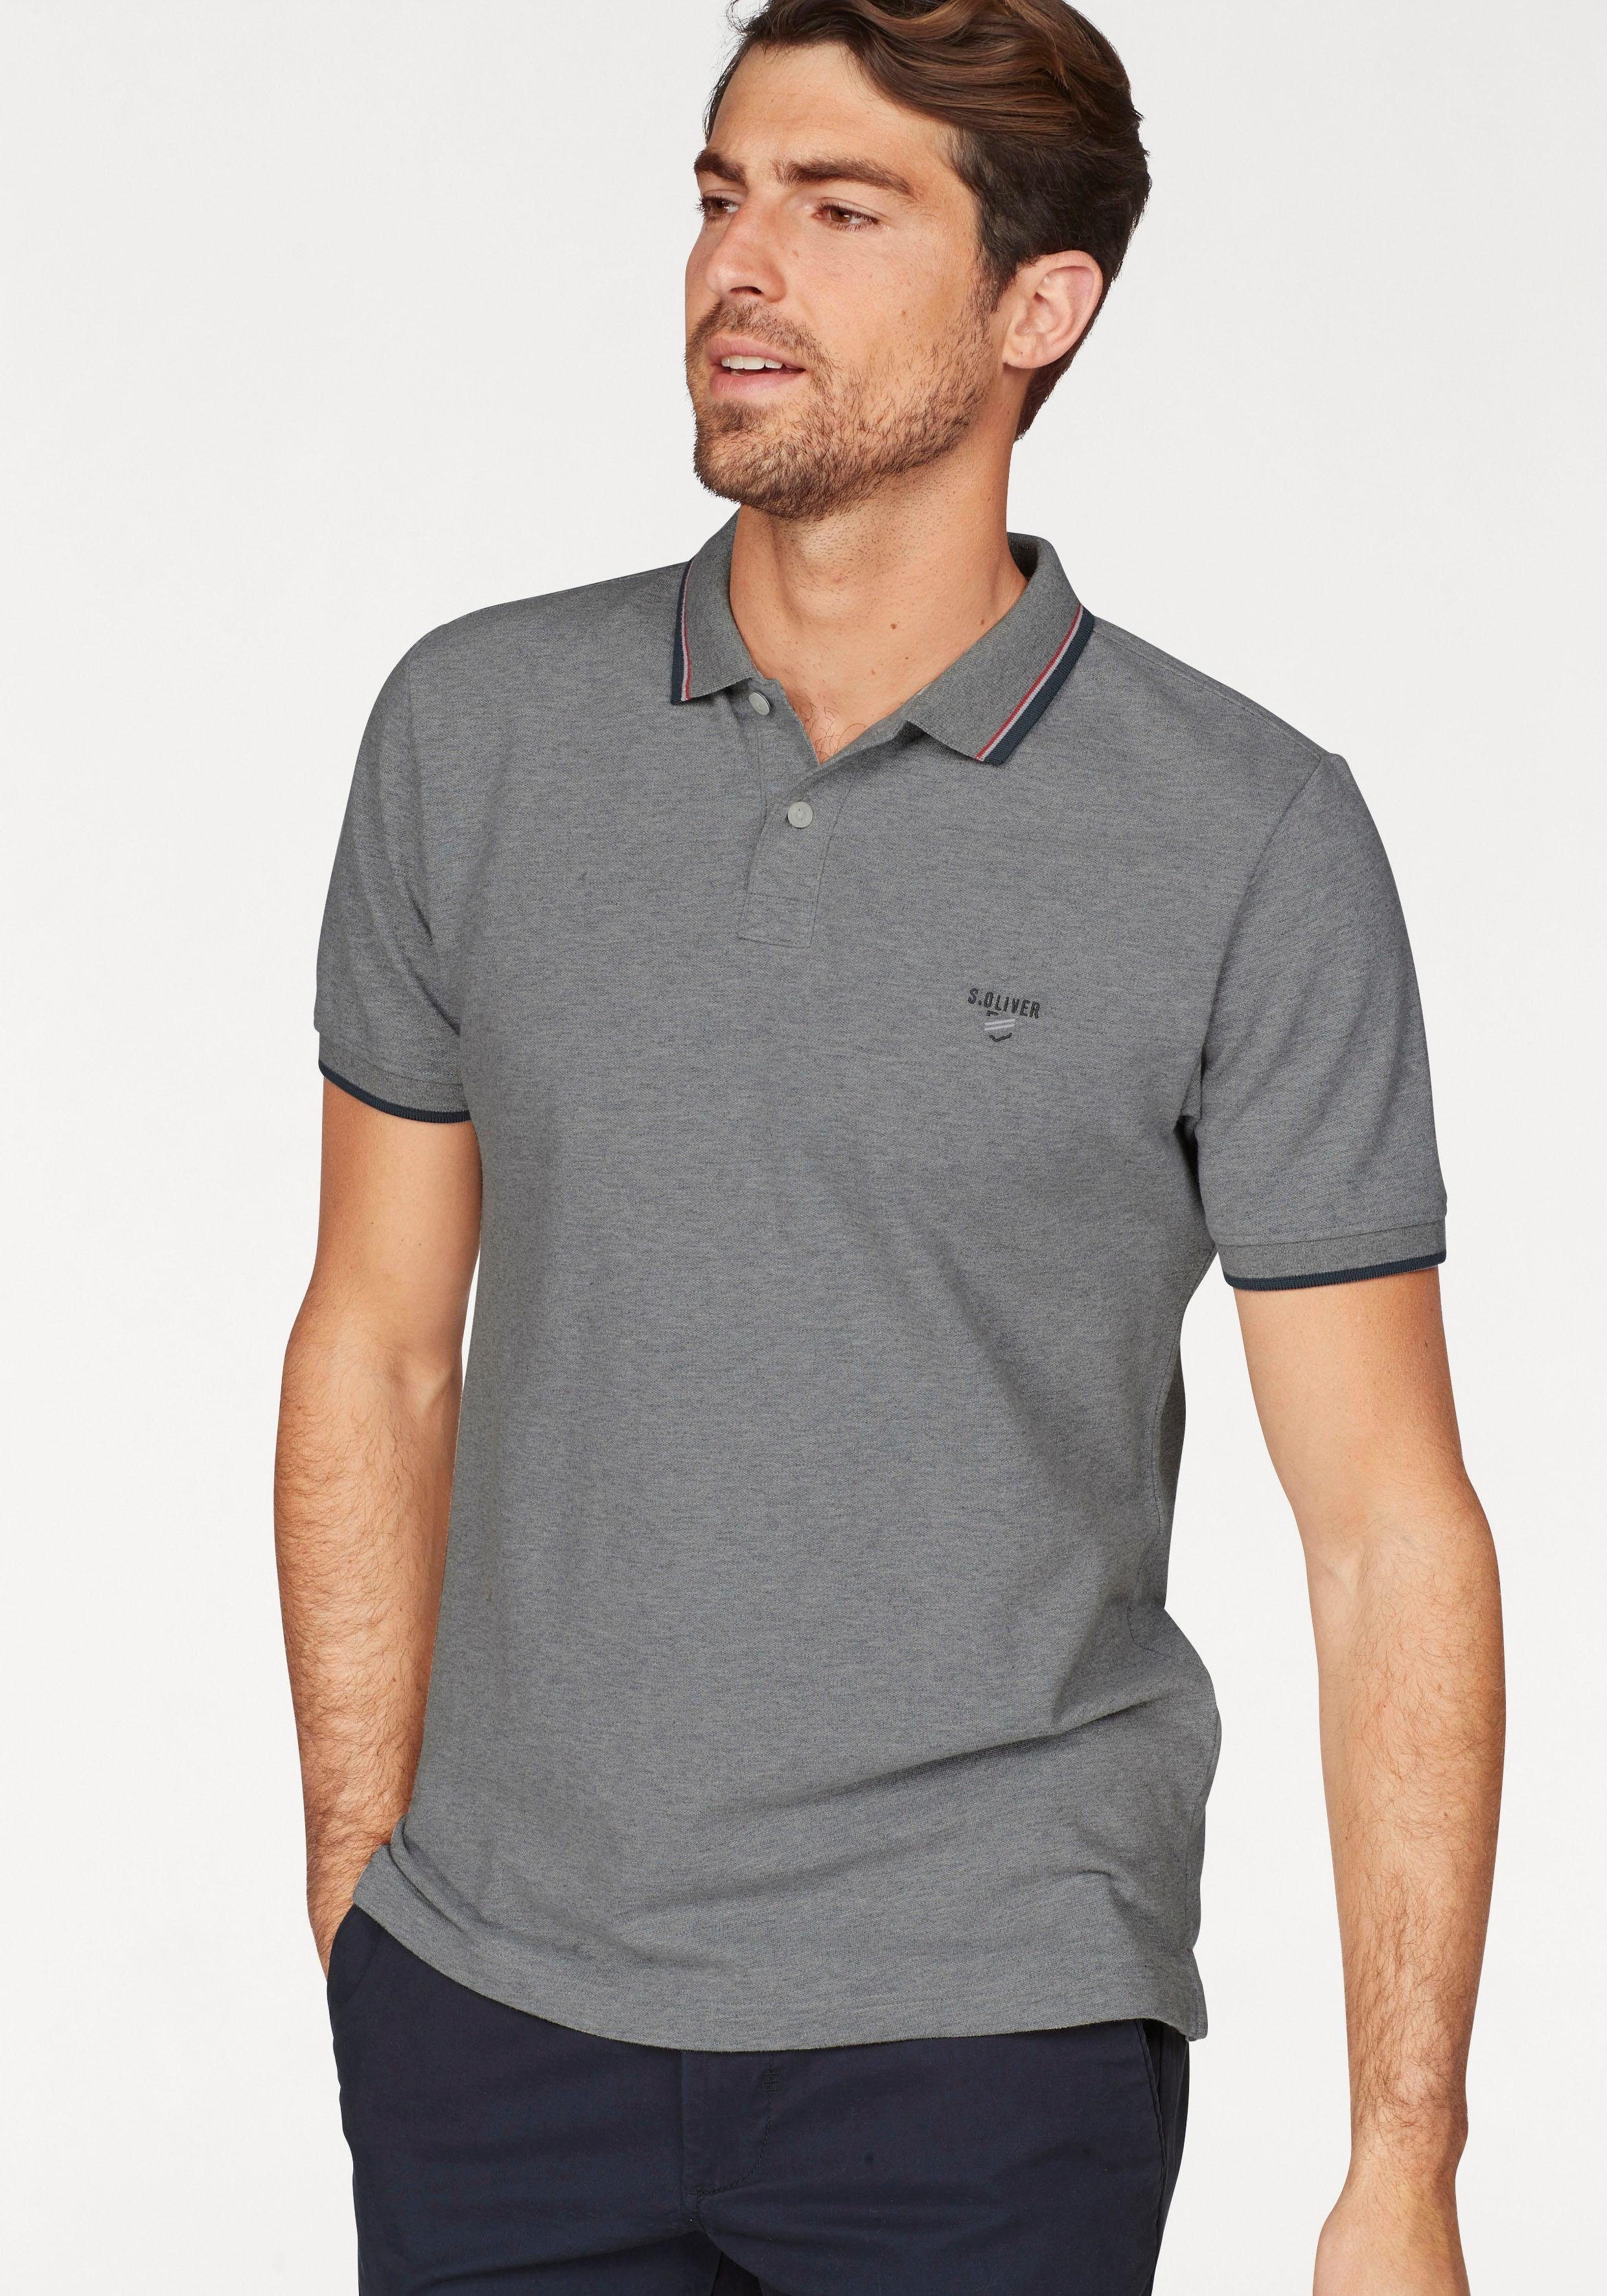 Otto - s.Oliver RED LABEL NU 15% KORTING: s.Oliver RED LABEL poloshirt